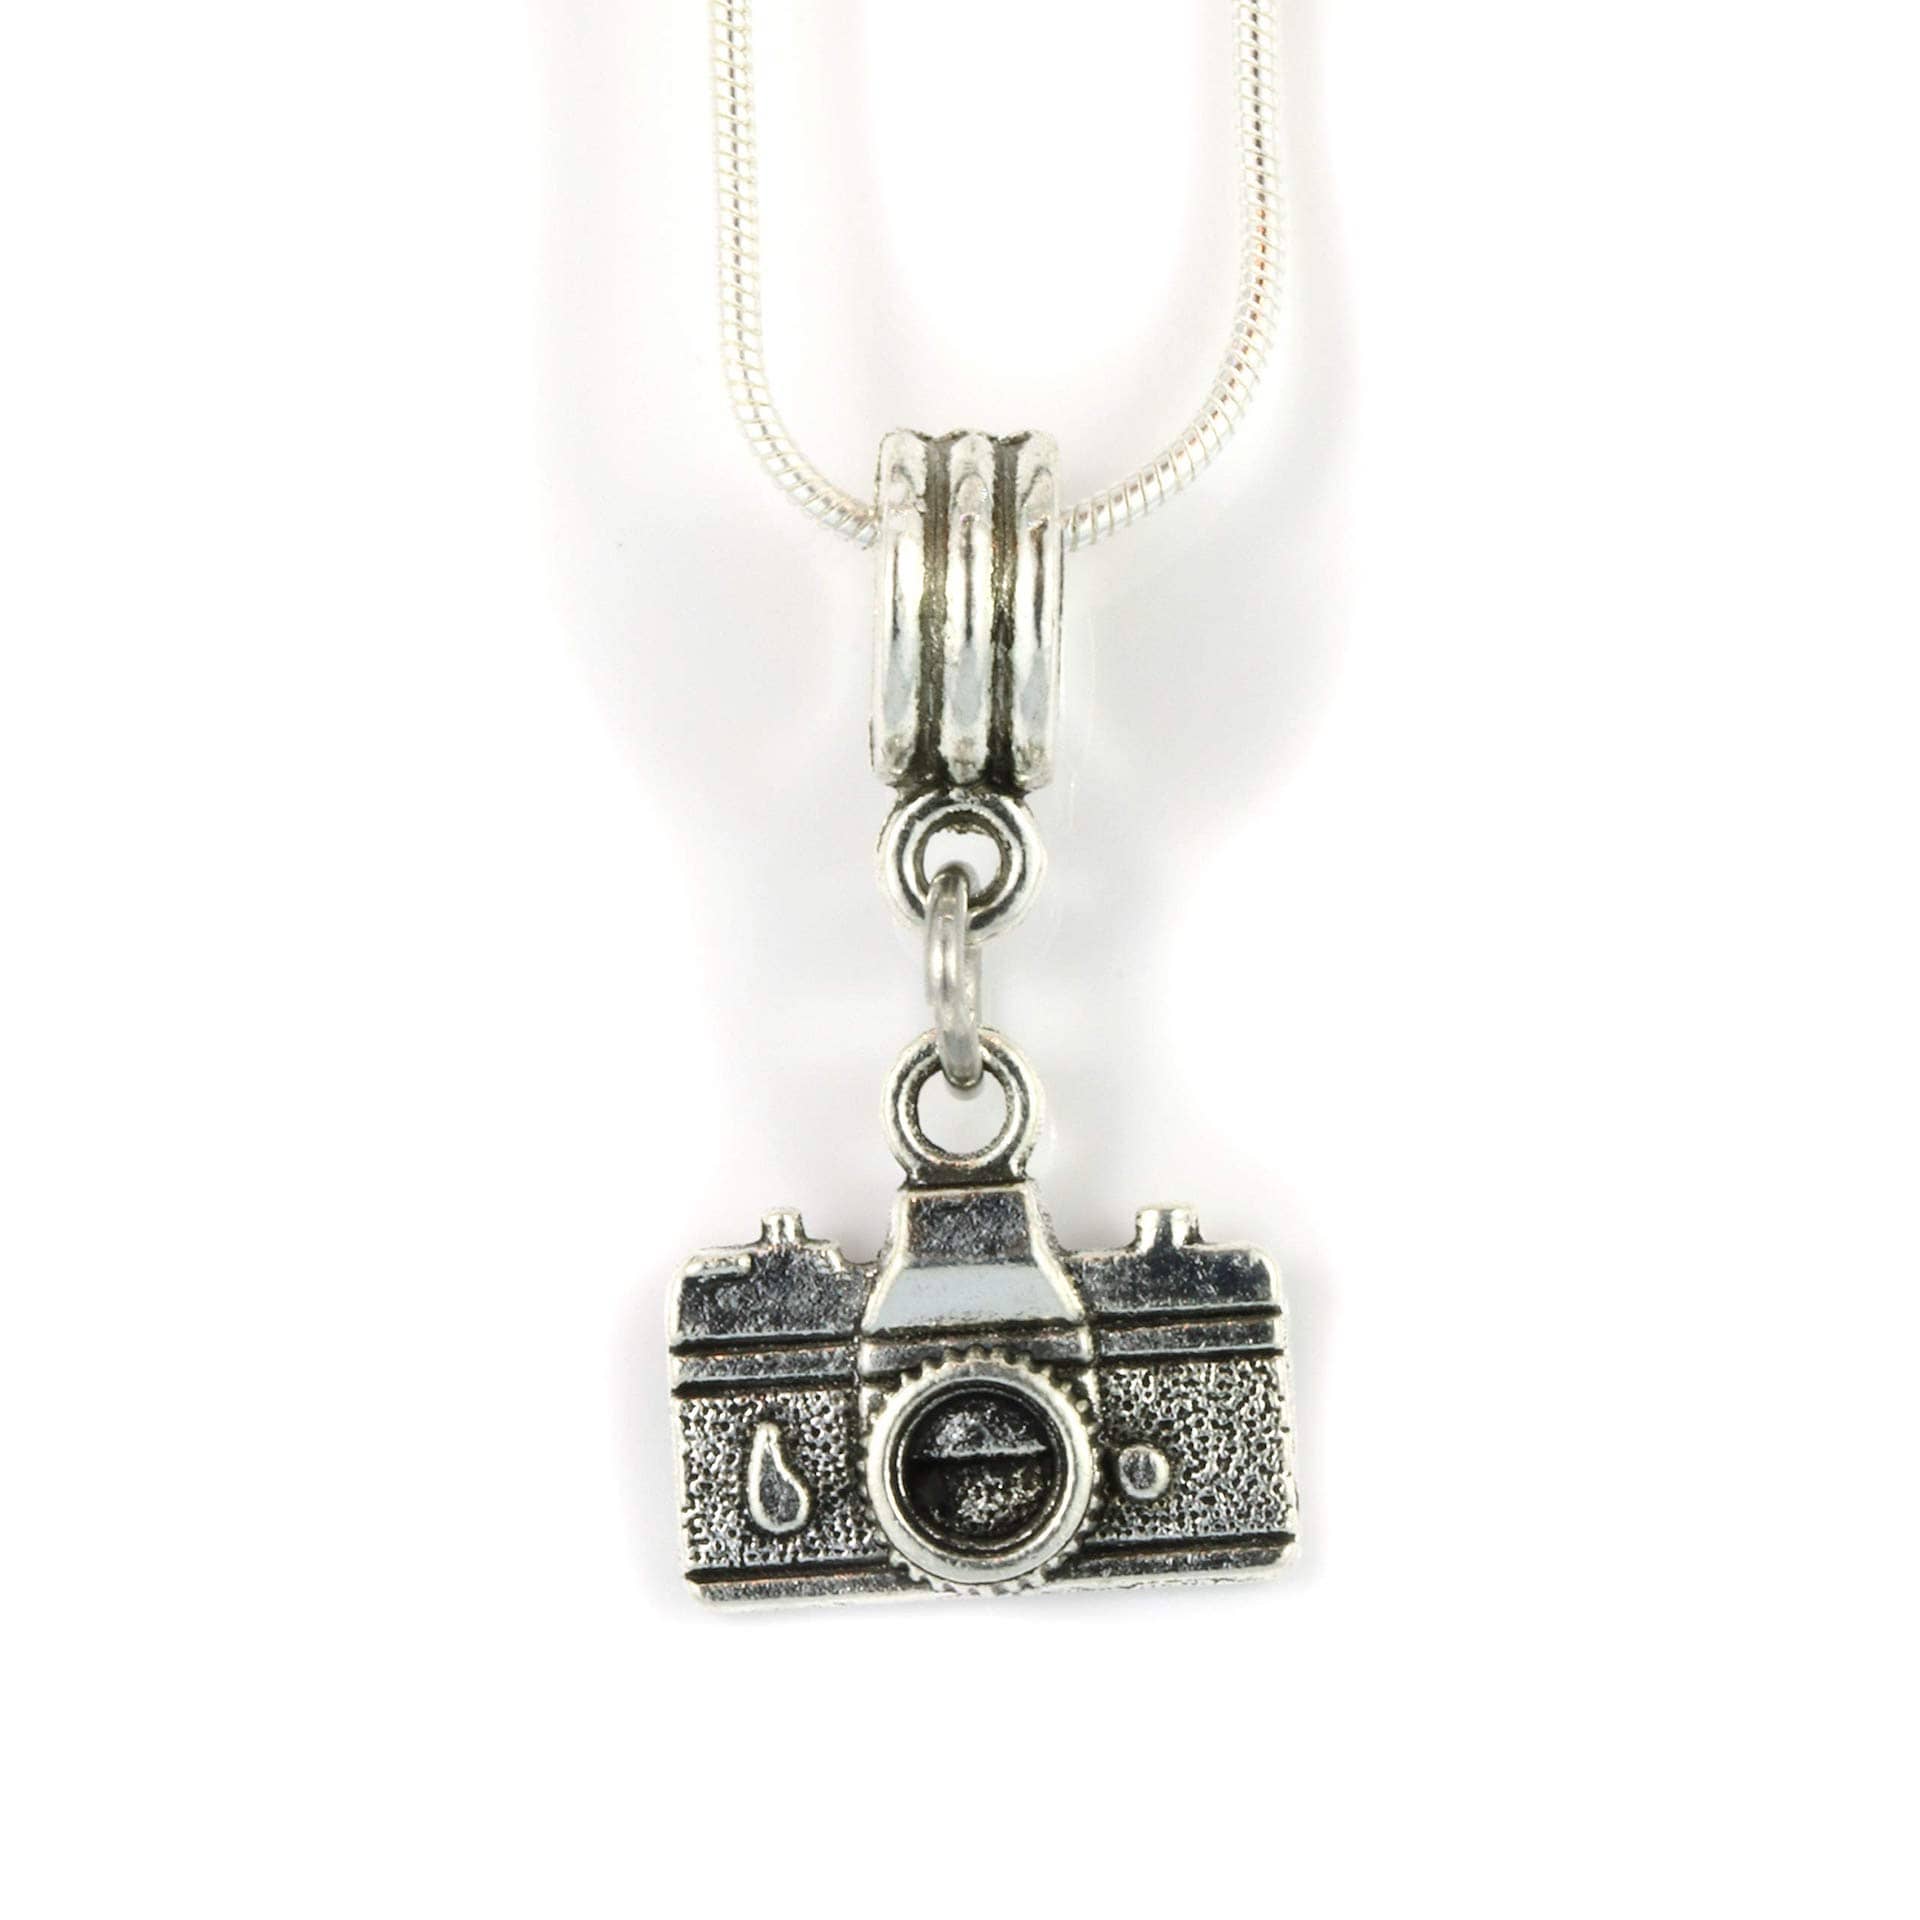 Best Photo Gifts for Photographers - Ideas Photographer Lovers - Photography Jewelry